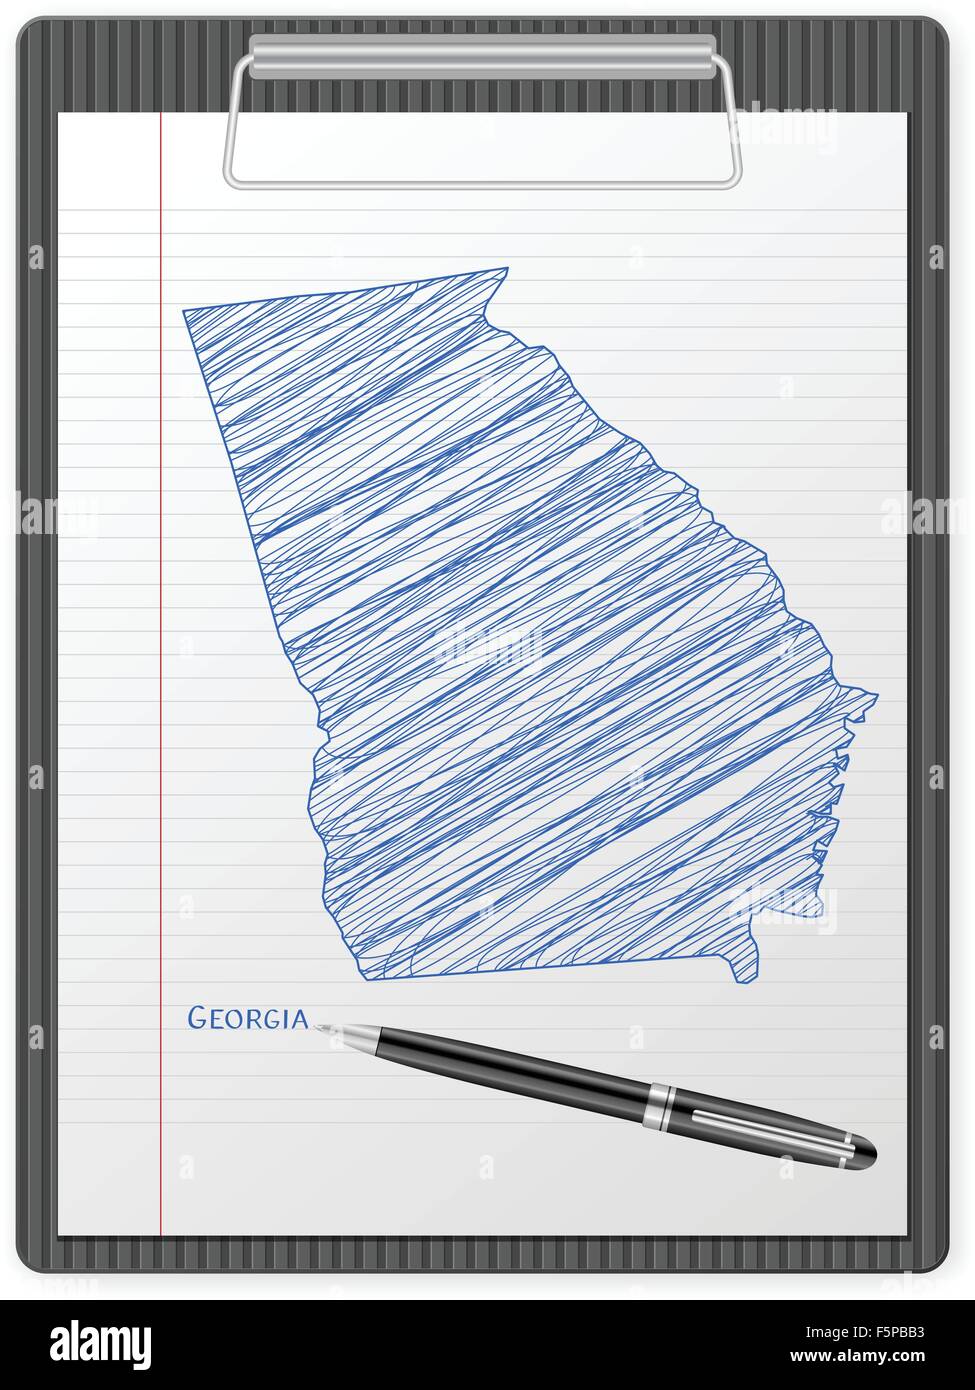 Clipboard with drawing Georgia map. Vector illustration. Stock Vector